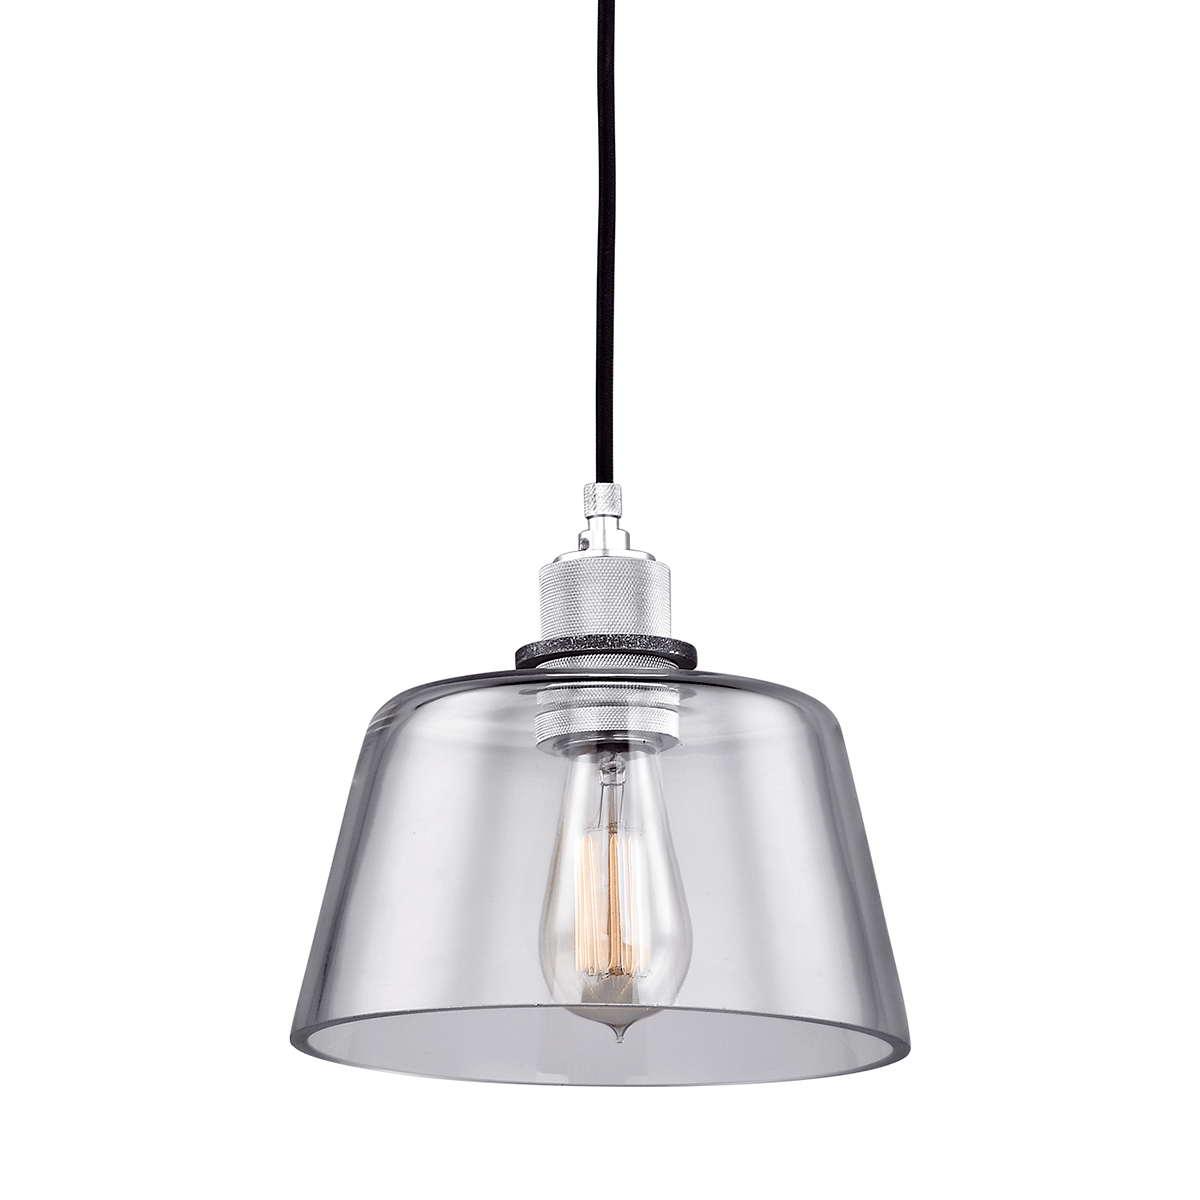 Old Silver and Polished Alumin with Clear Glass Shade Pendant - LV LIGHTING